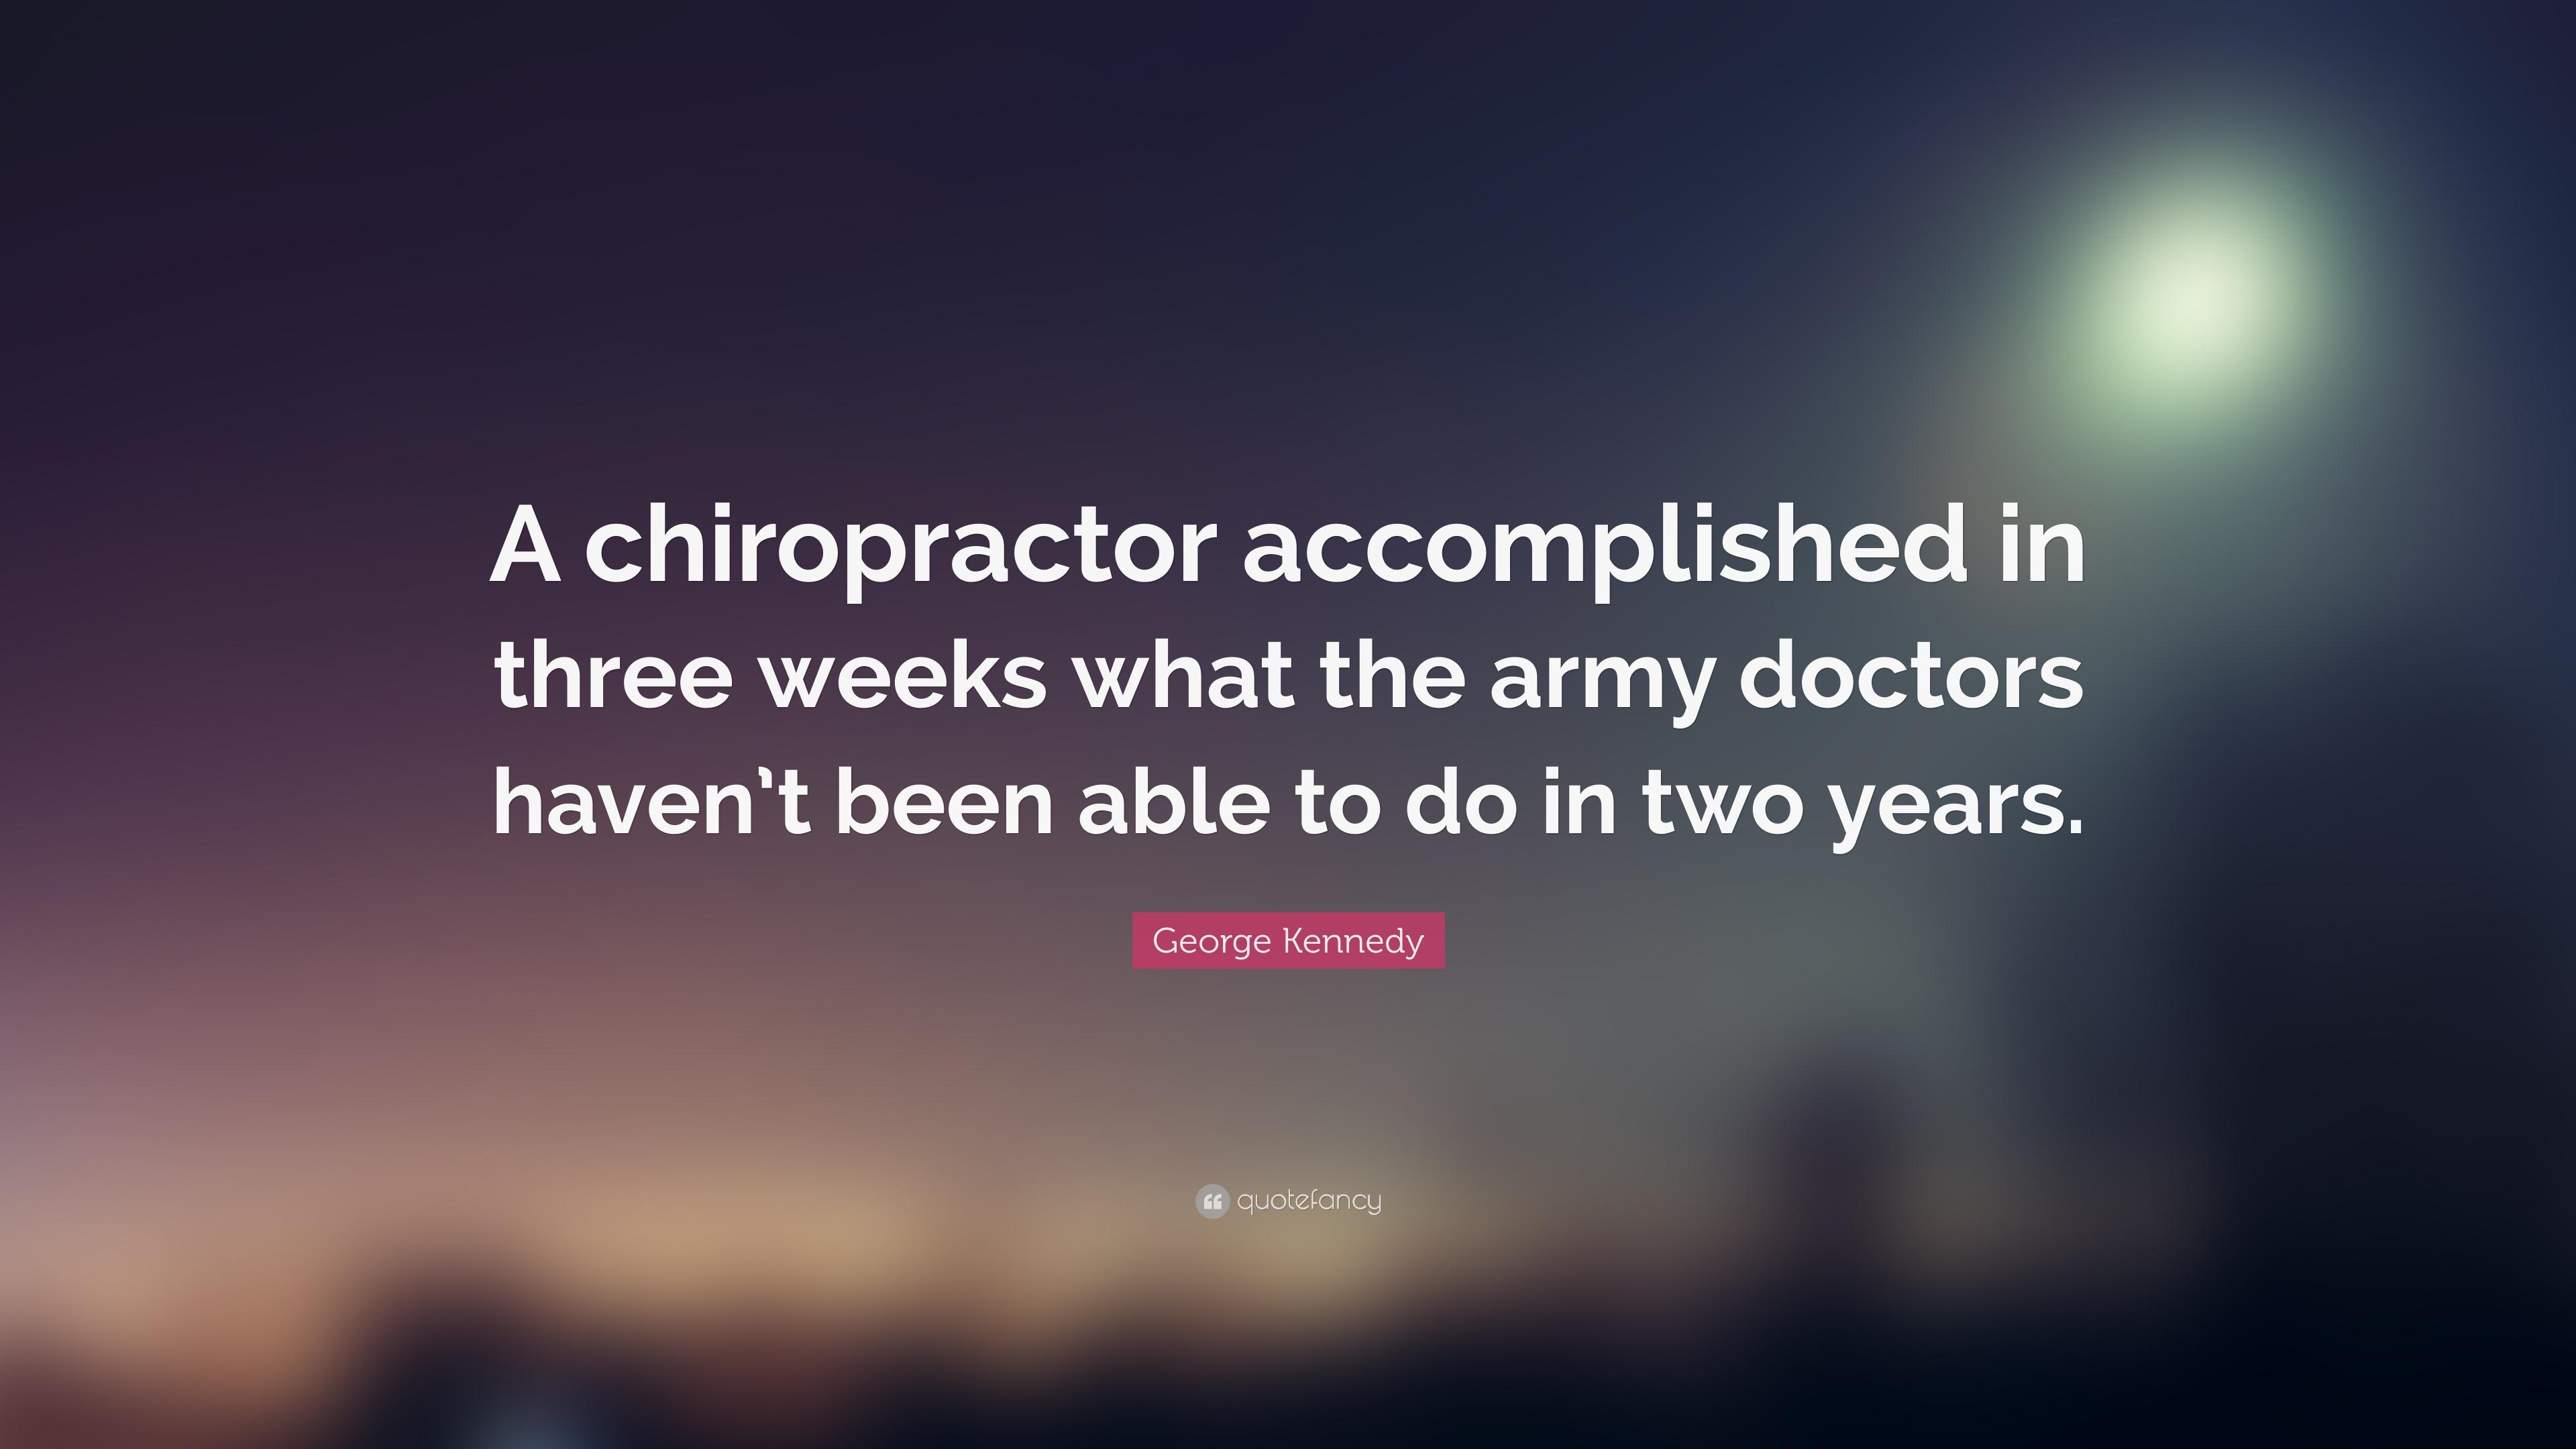 George Kennedy Quote: “A chiropractor accomplished in three